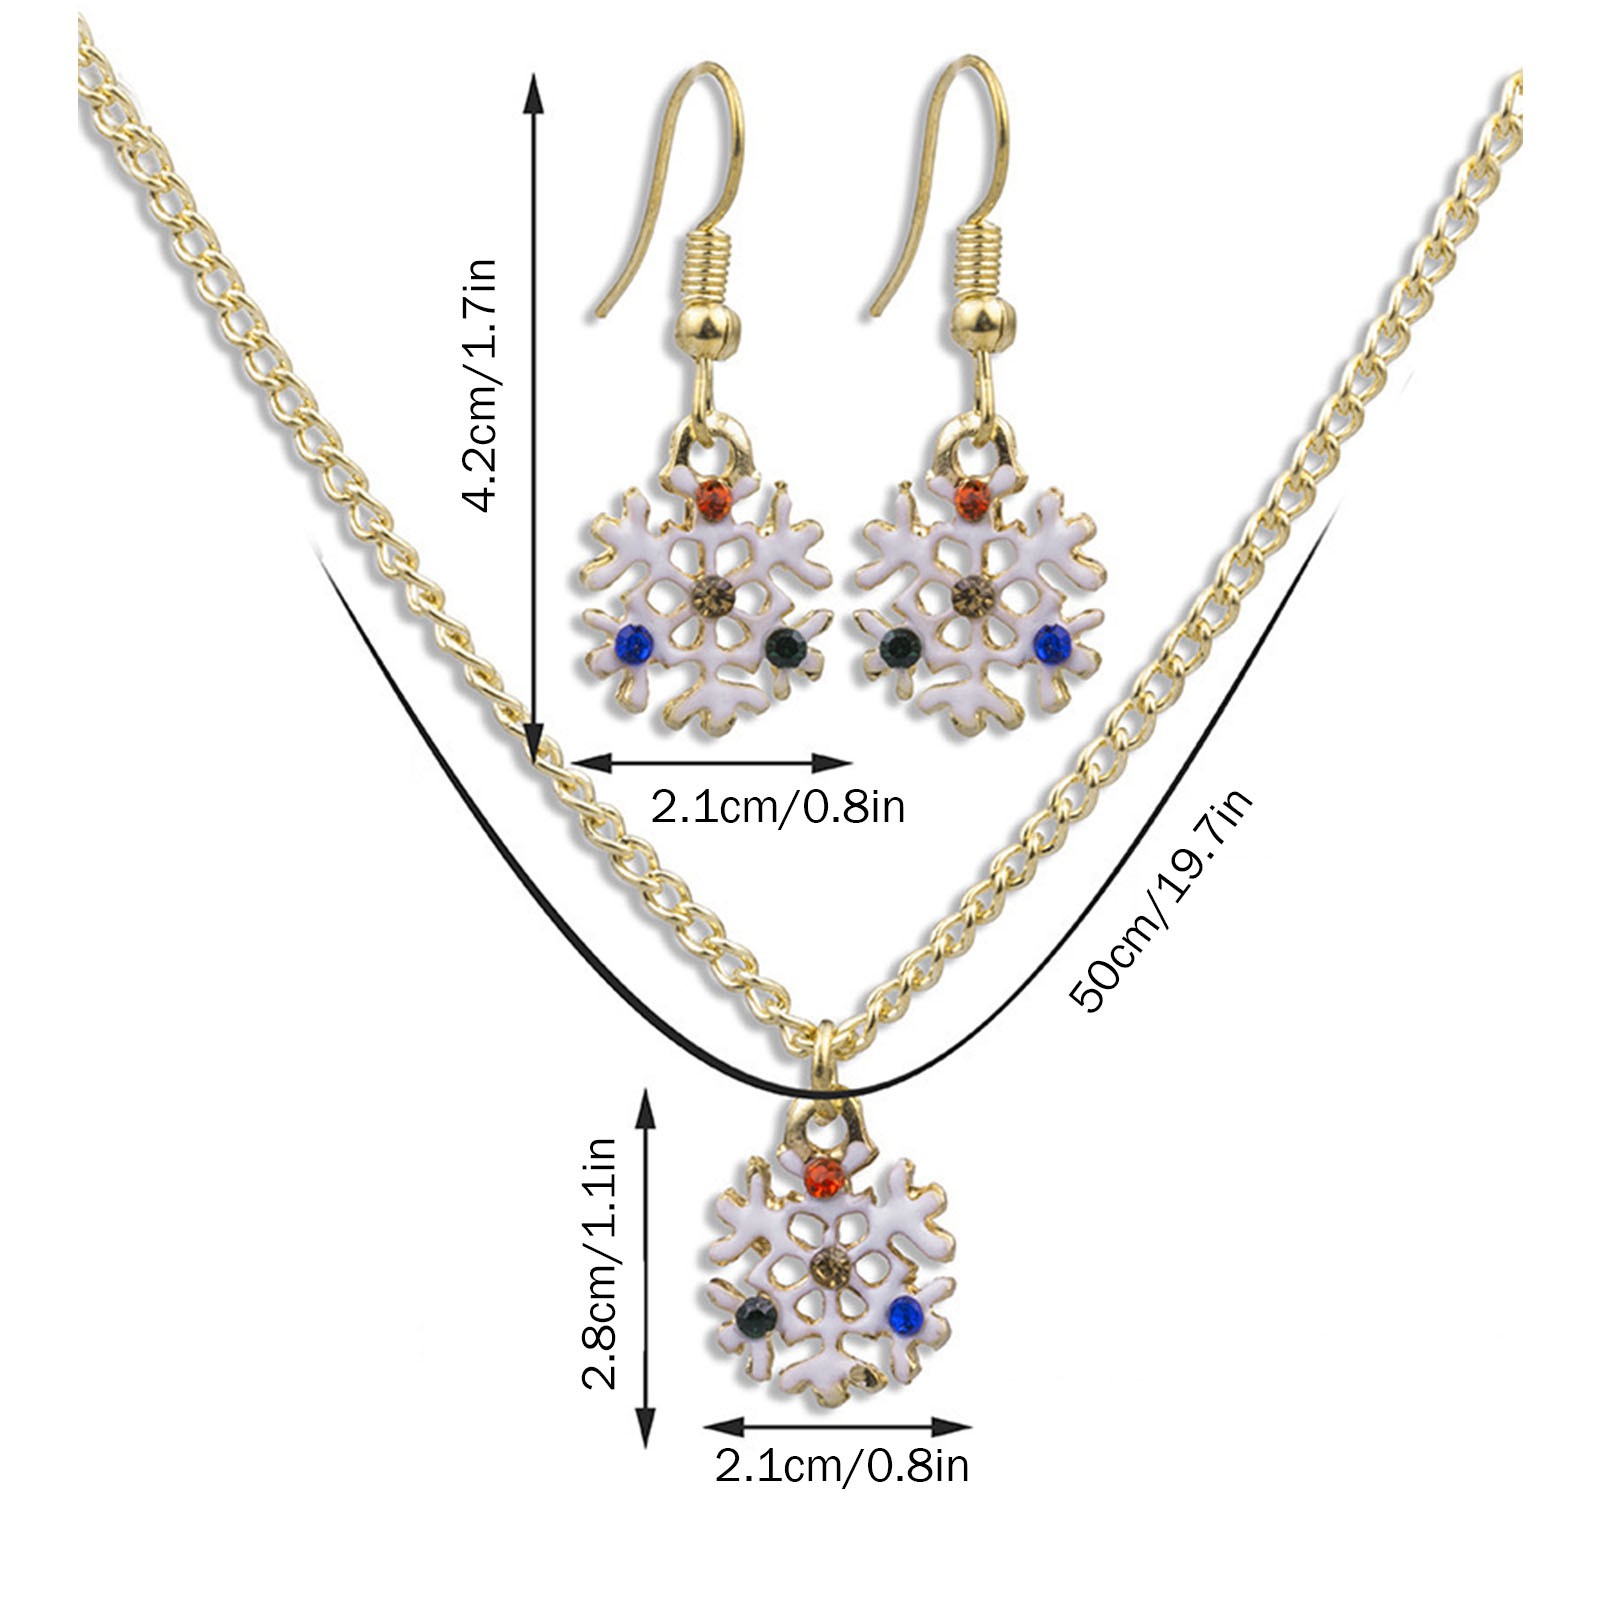 1PCS Christmas Creative Necklace Personality Necklace Earrings Set Girls Wear Xuehua Style A Variety Of Effects Fashion Jewelry For D - image 3 of 9